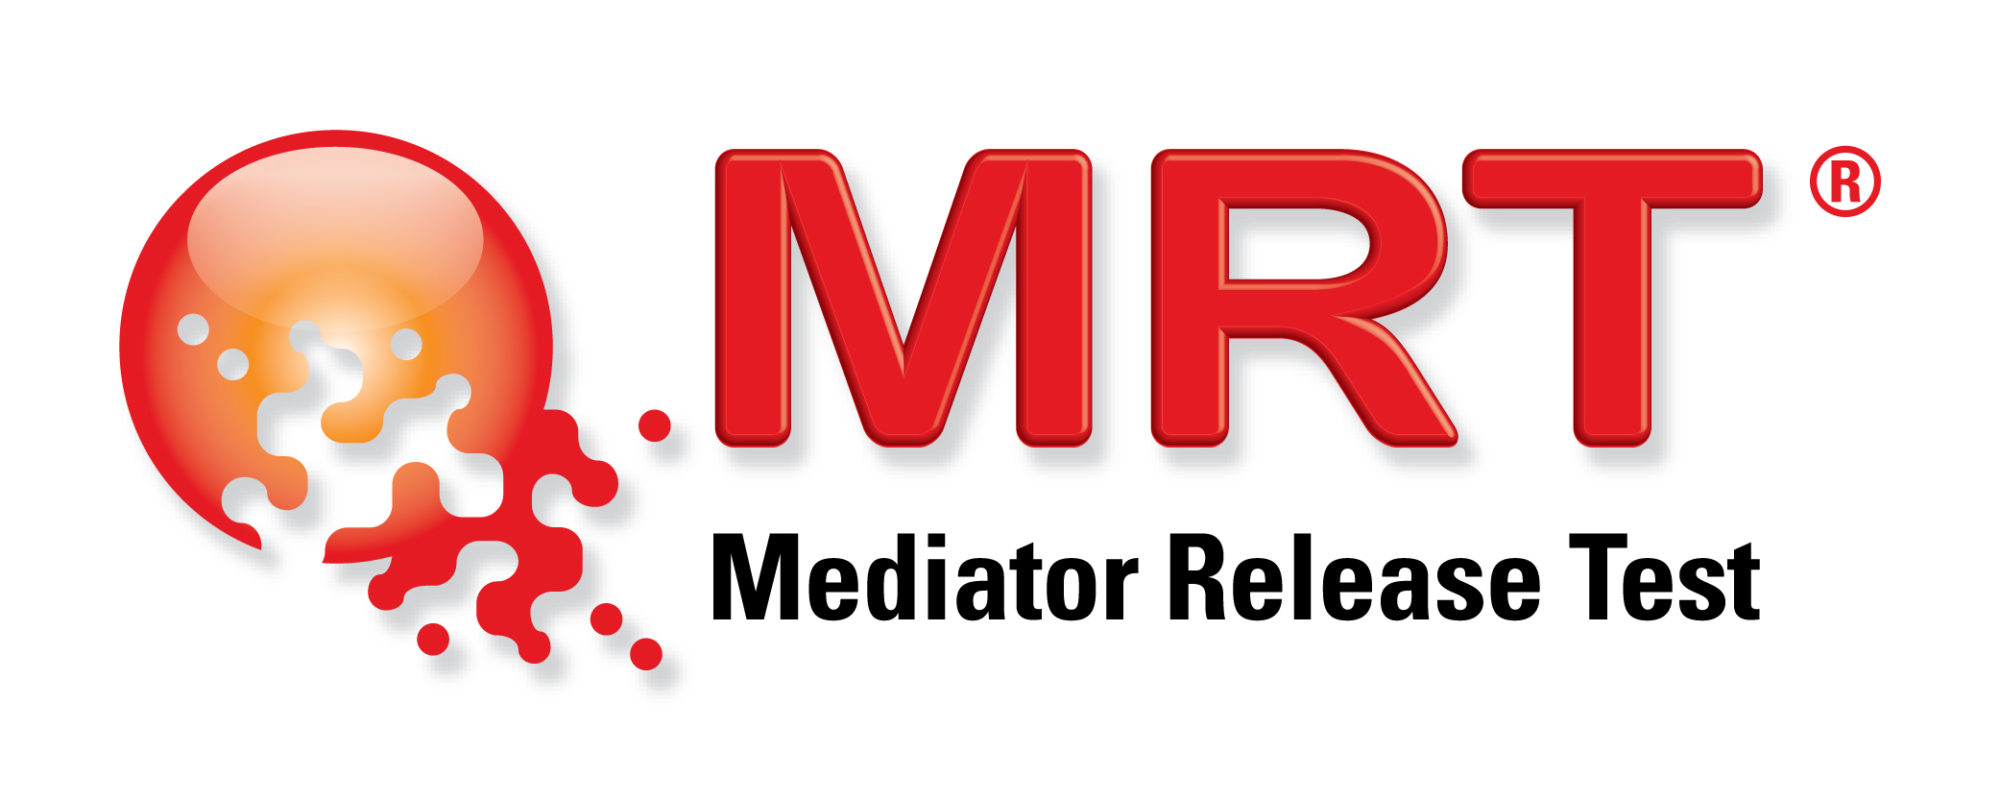 The Patented Mediator Release Test